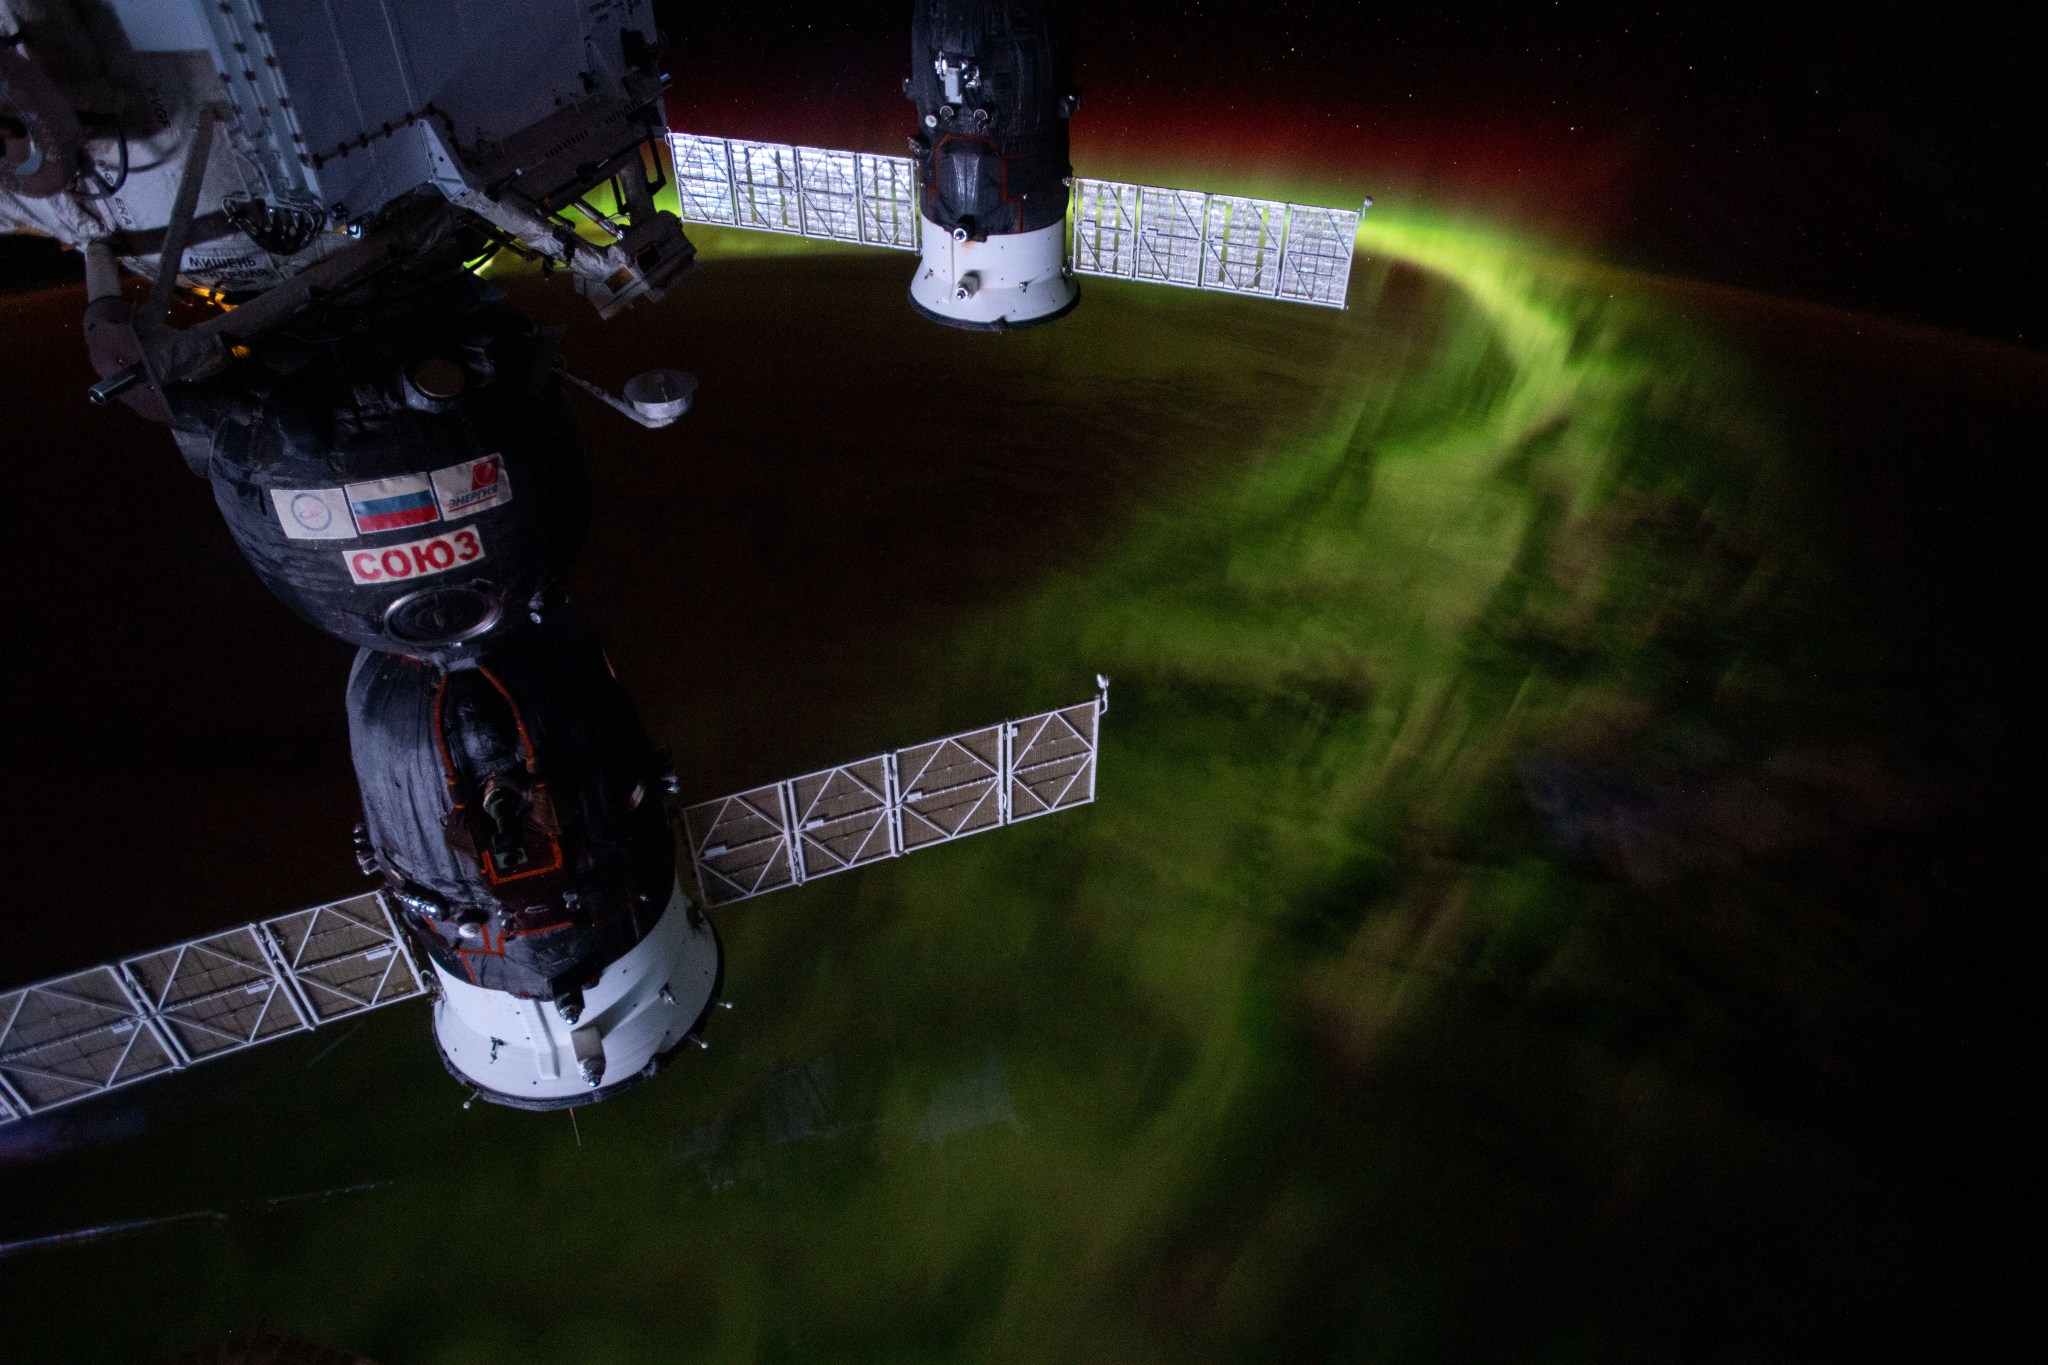 image of Russian space craft docked to ISS, with earth in the background, aurora australis (mostly green) visible